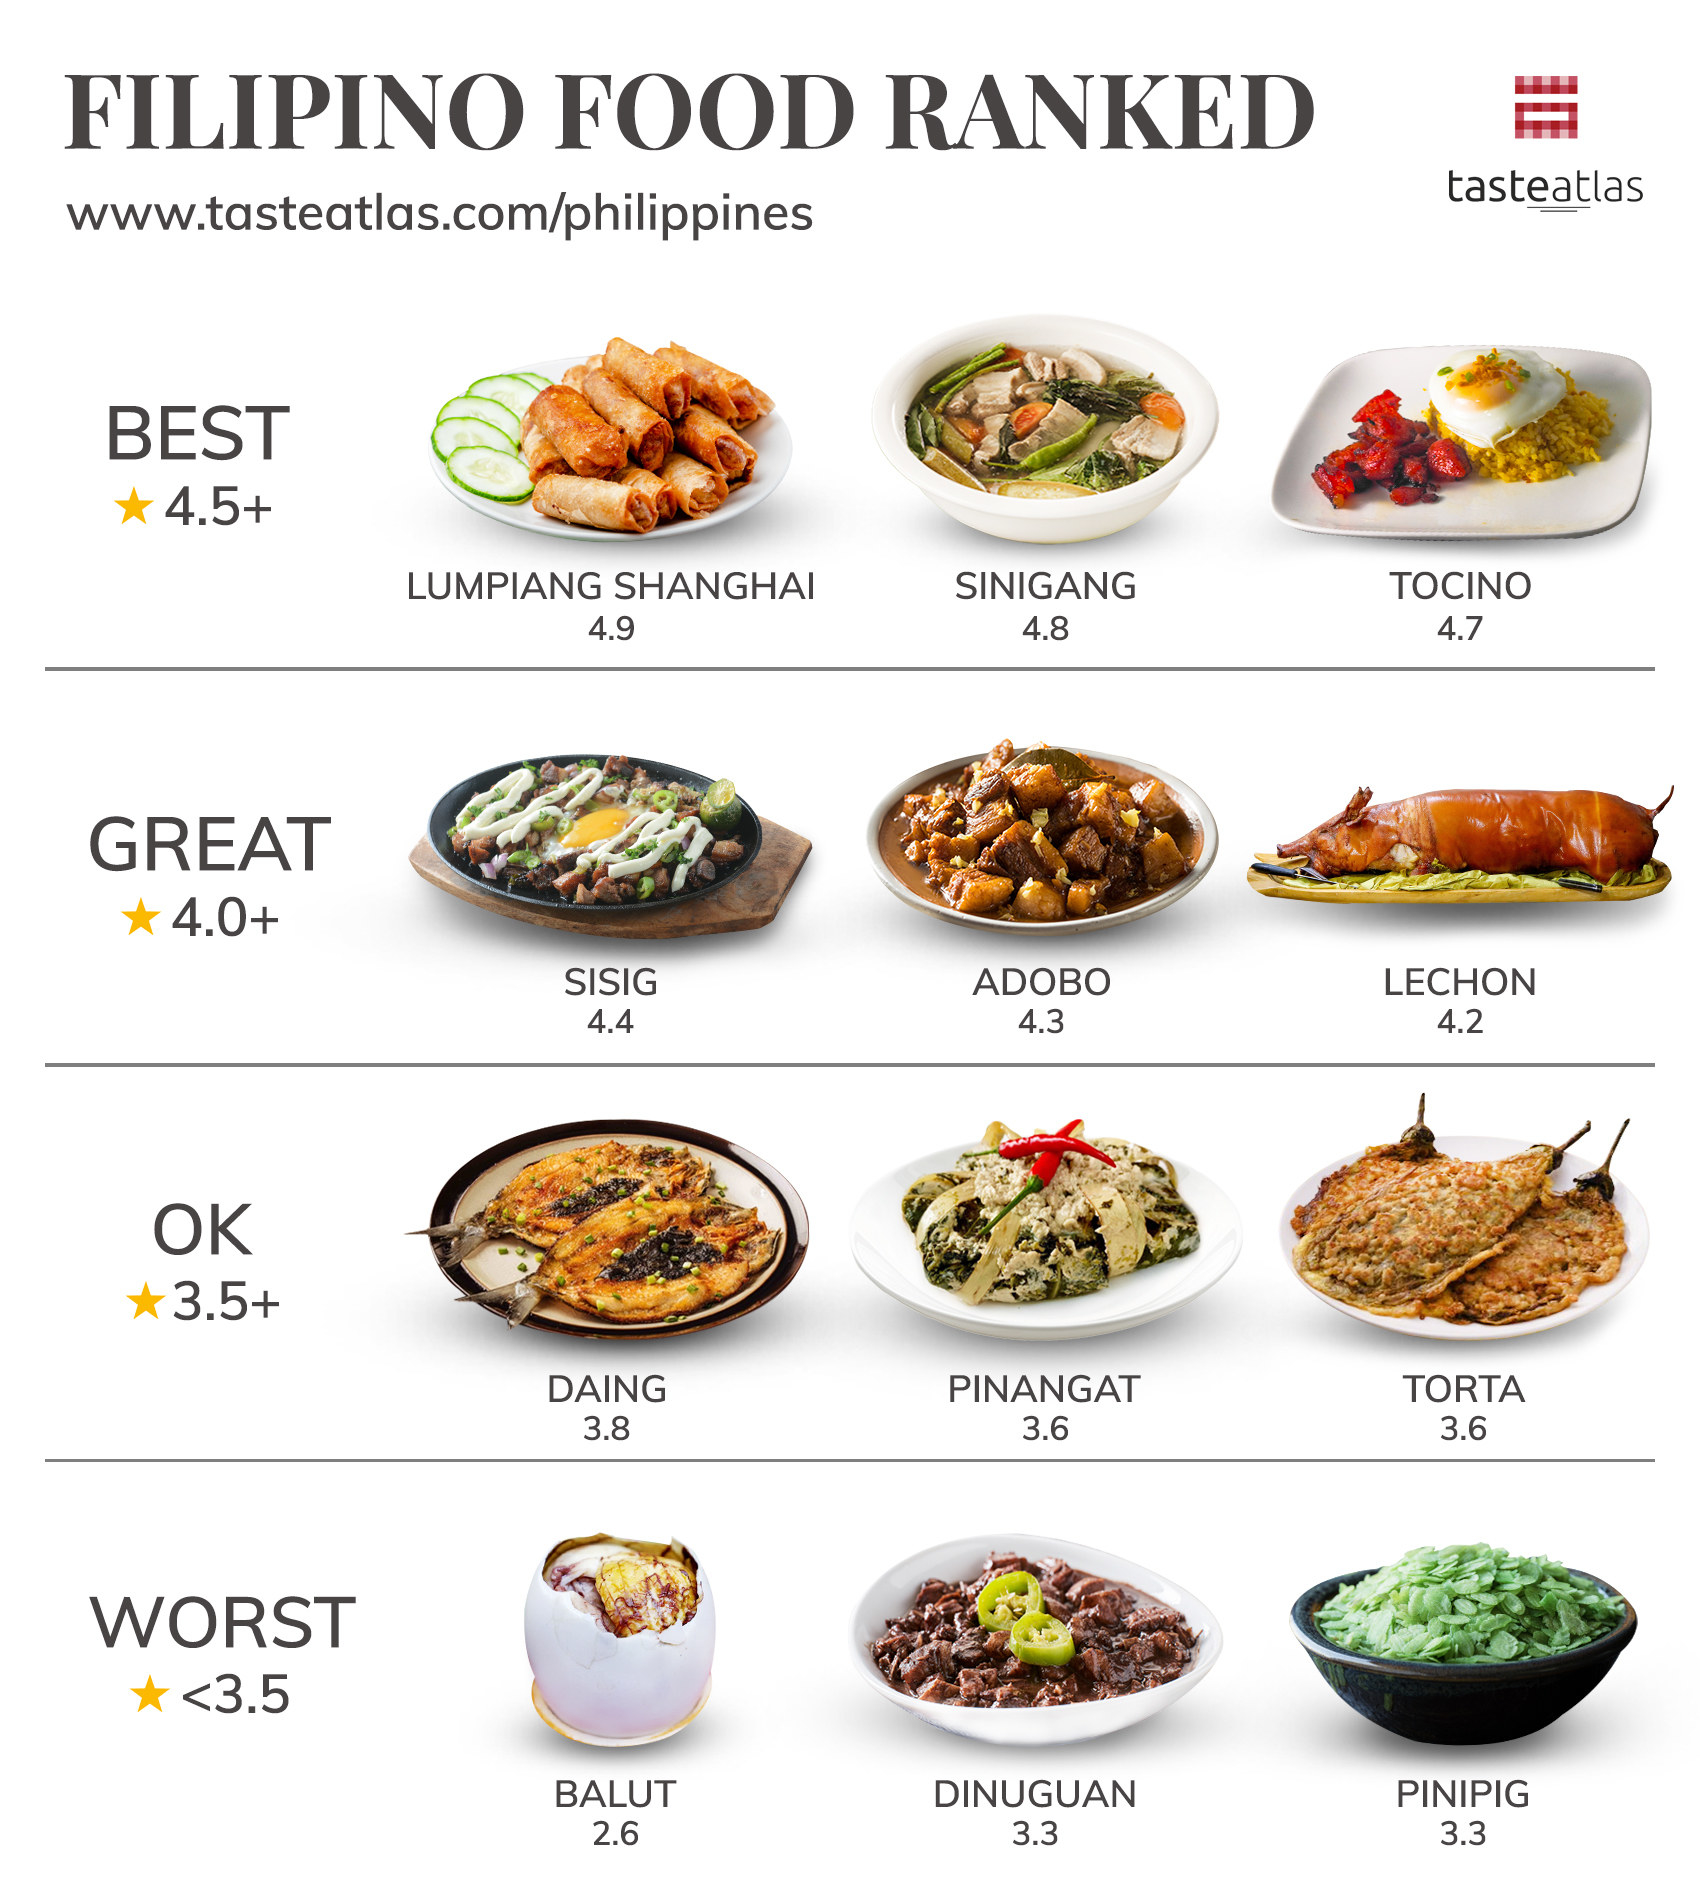 Graphic showing Lumpiang shanghai ranked best